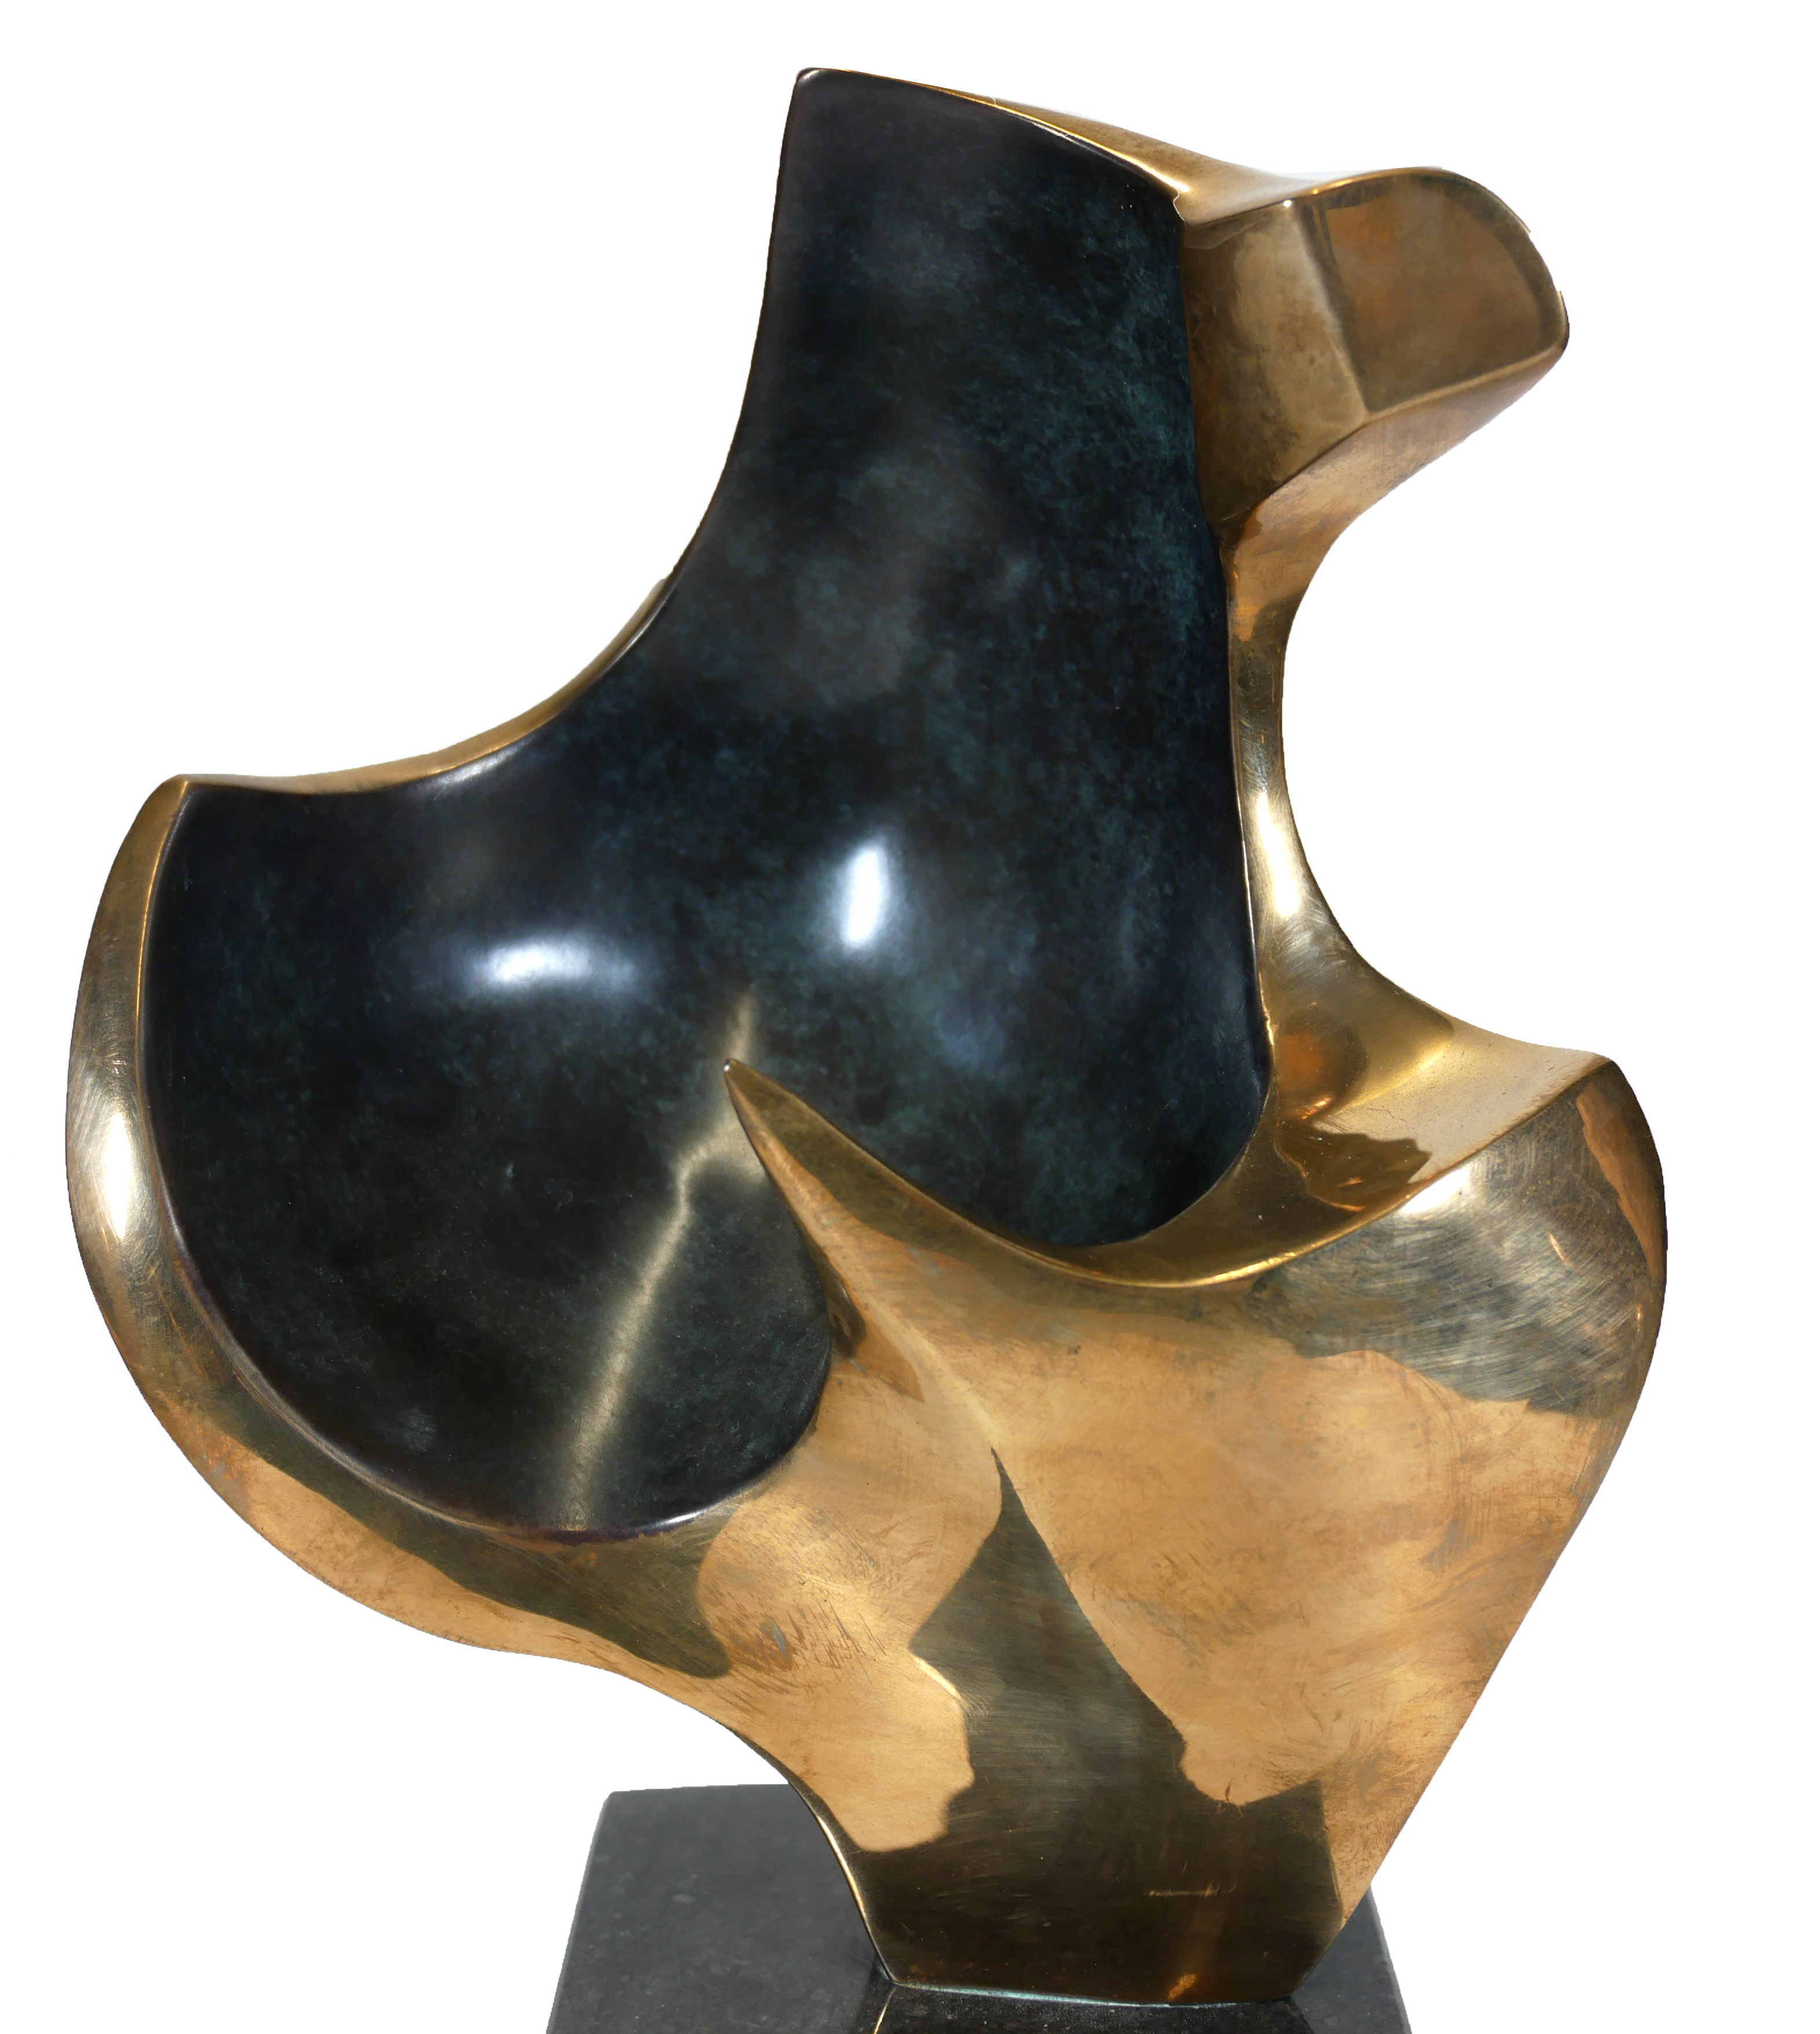 JOSEPH SLOAN, B. 1940, POLISHED BRONZE (4/5) Titled 'Conductor Study IV', signed, numbered and dated - Image 4 of 4